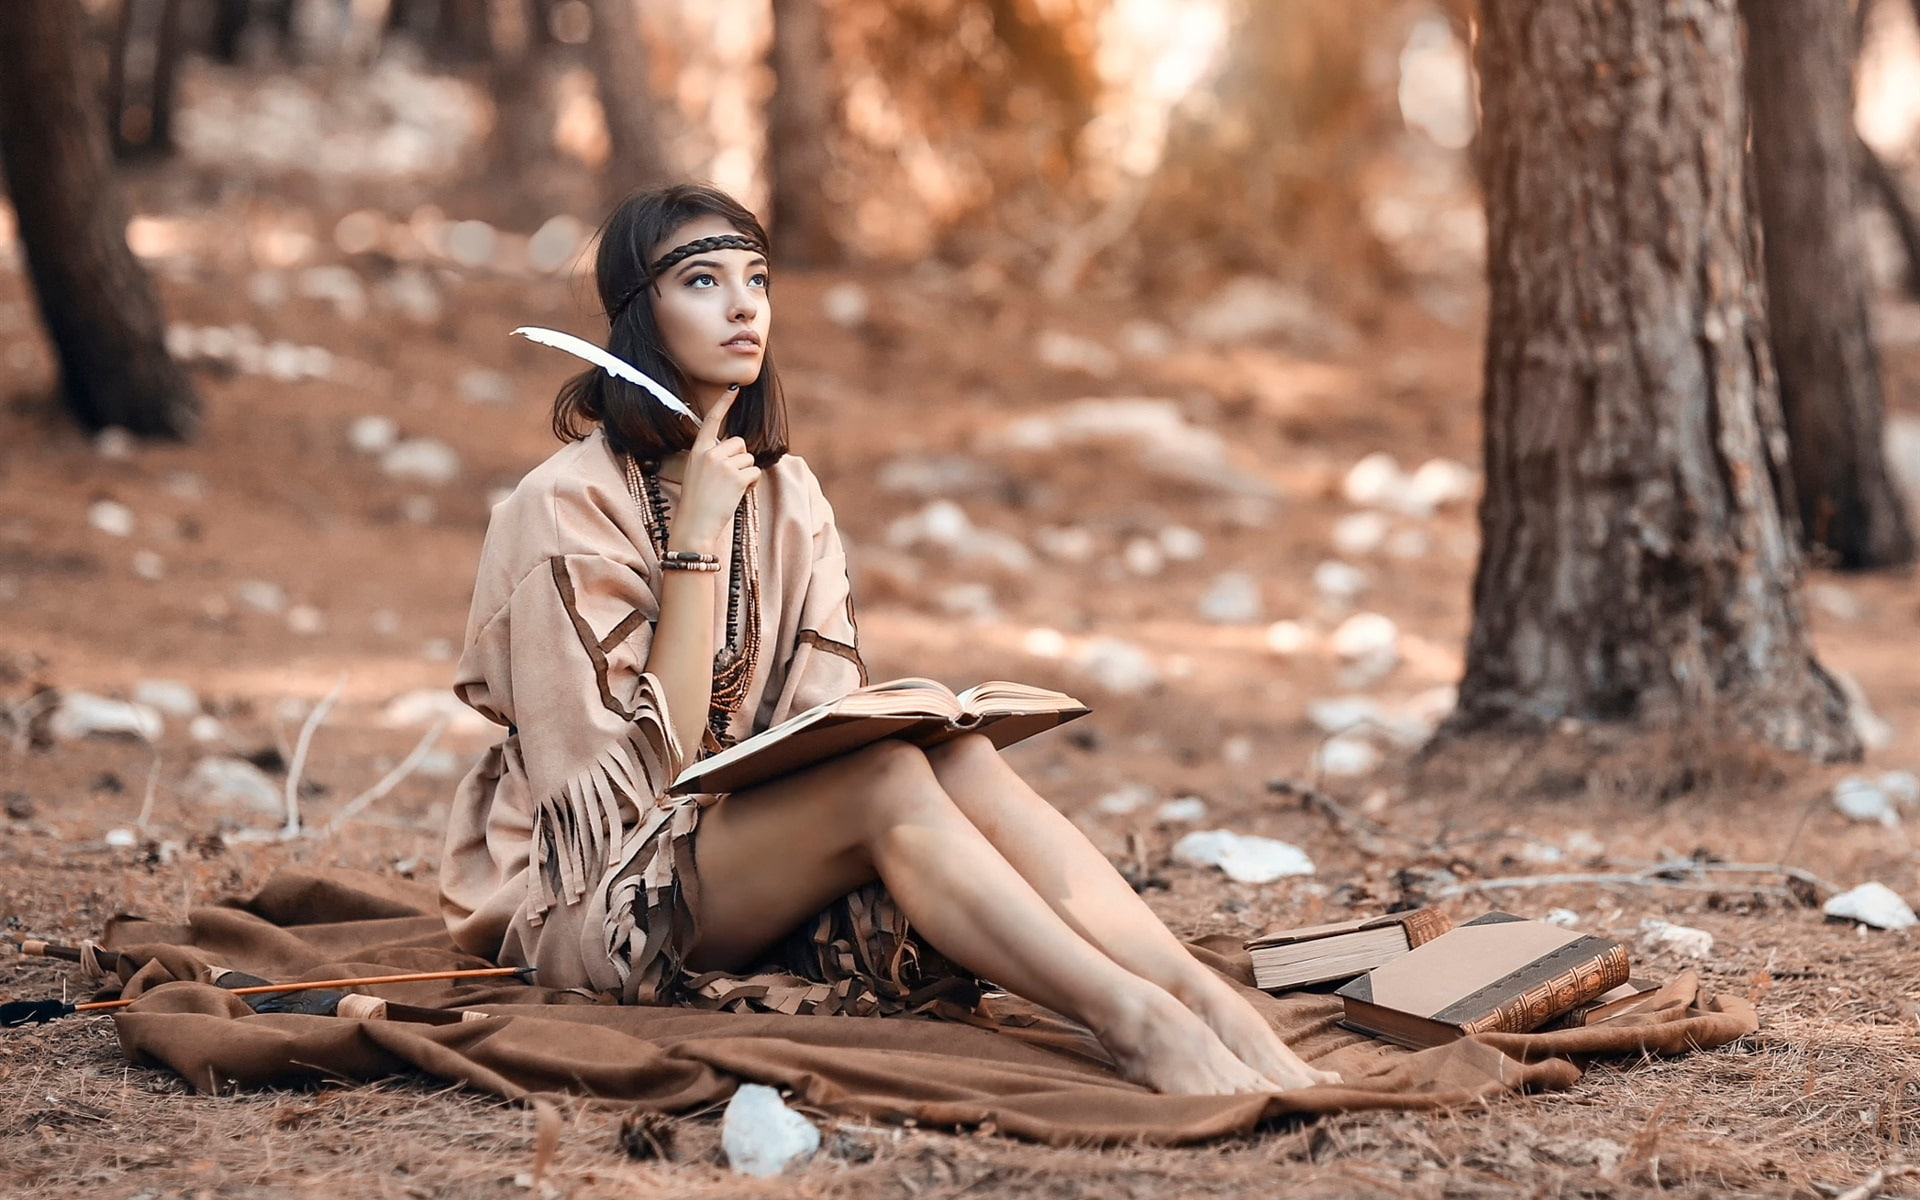 Long hair girl in the forest, reading book